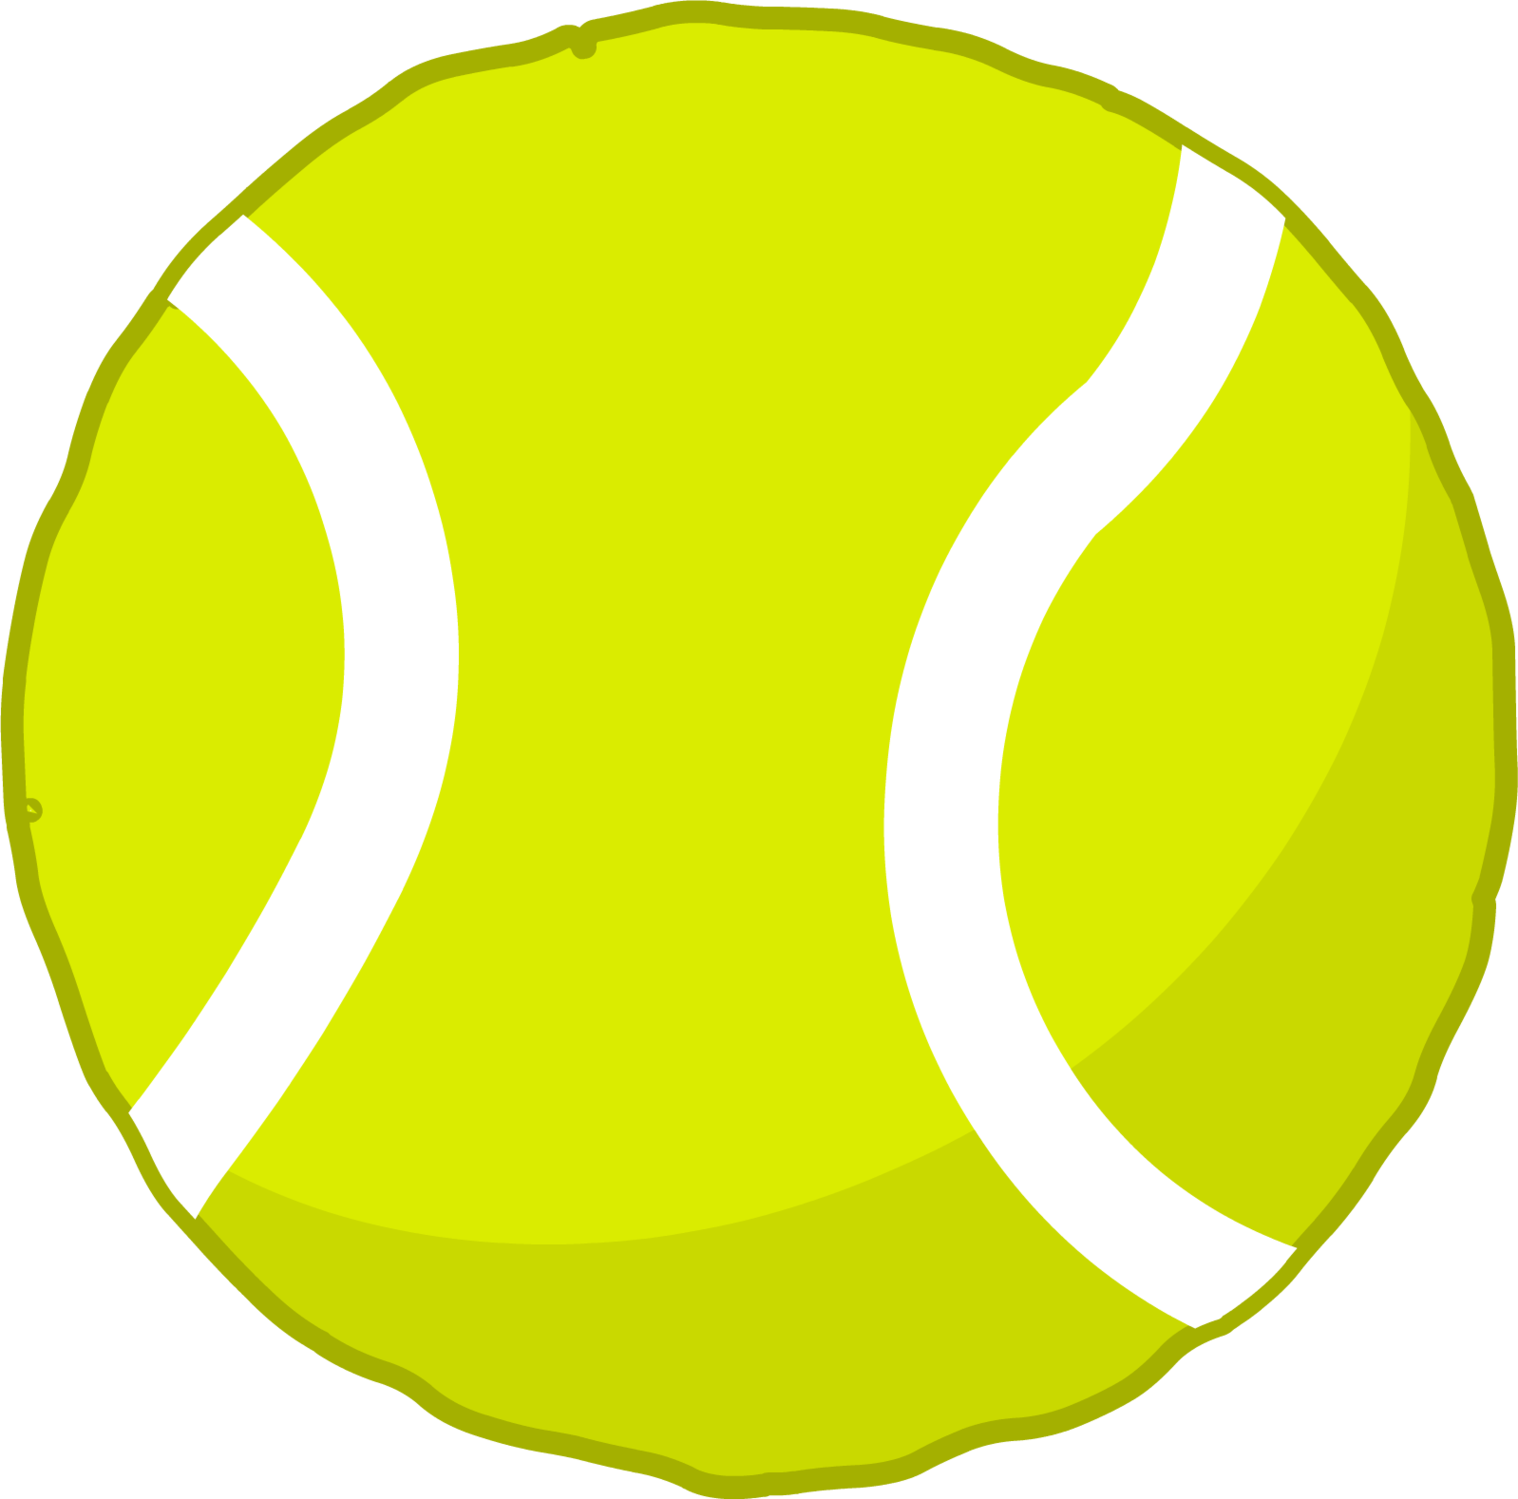 Picture of tennis ball clipart free to use clip art resource